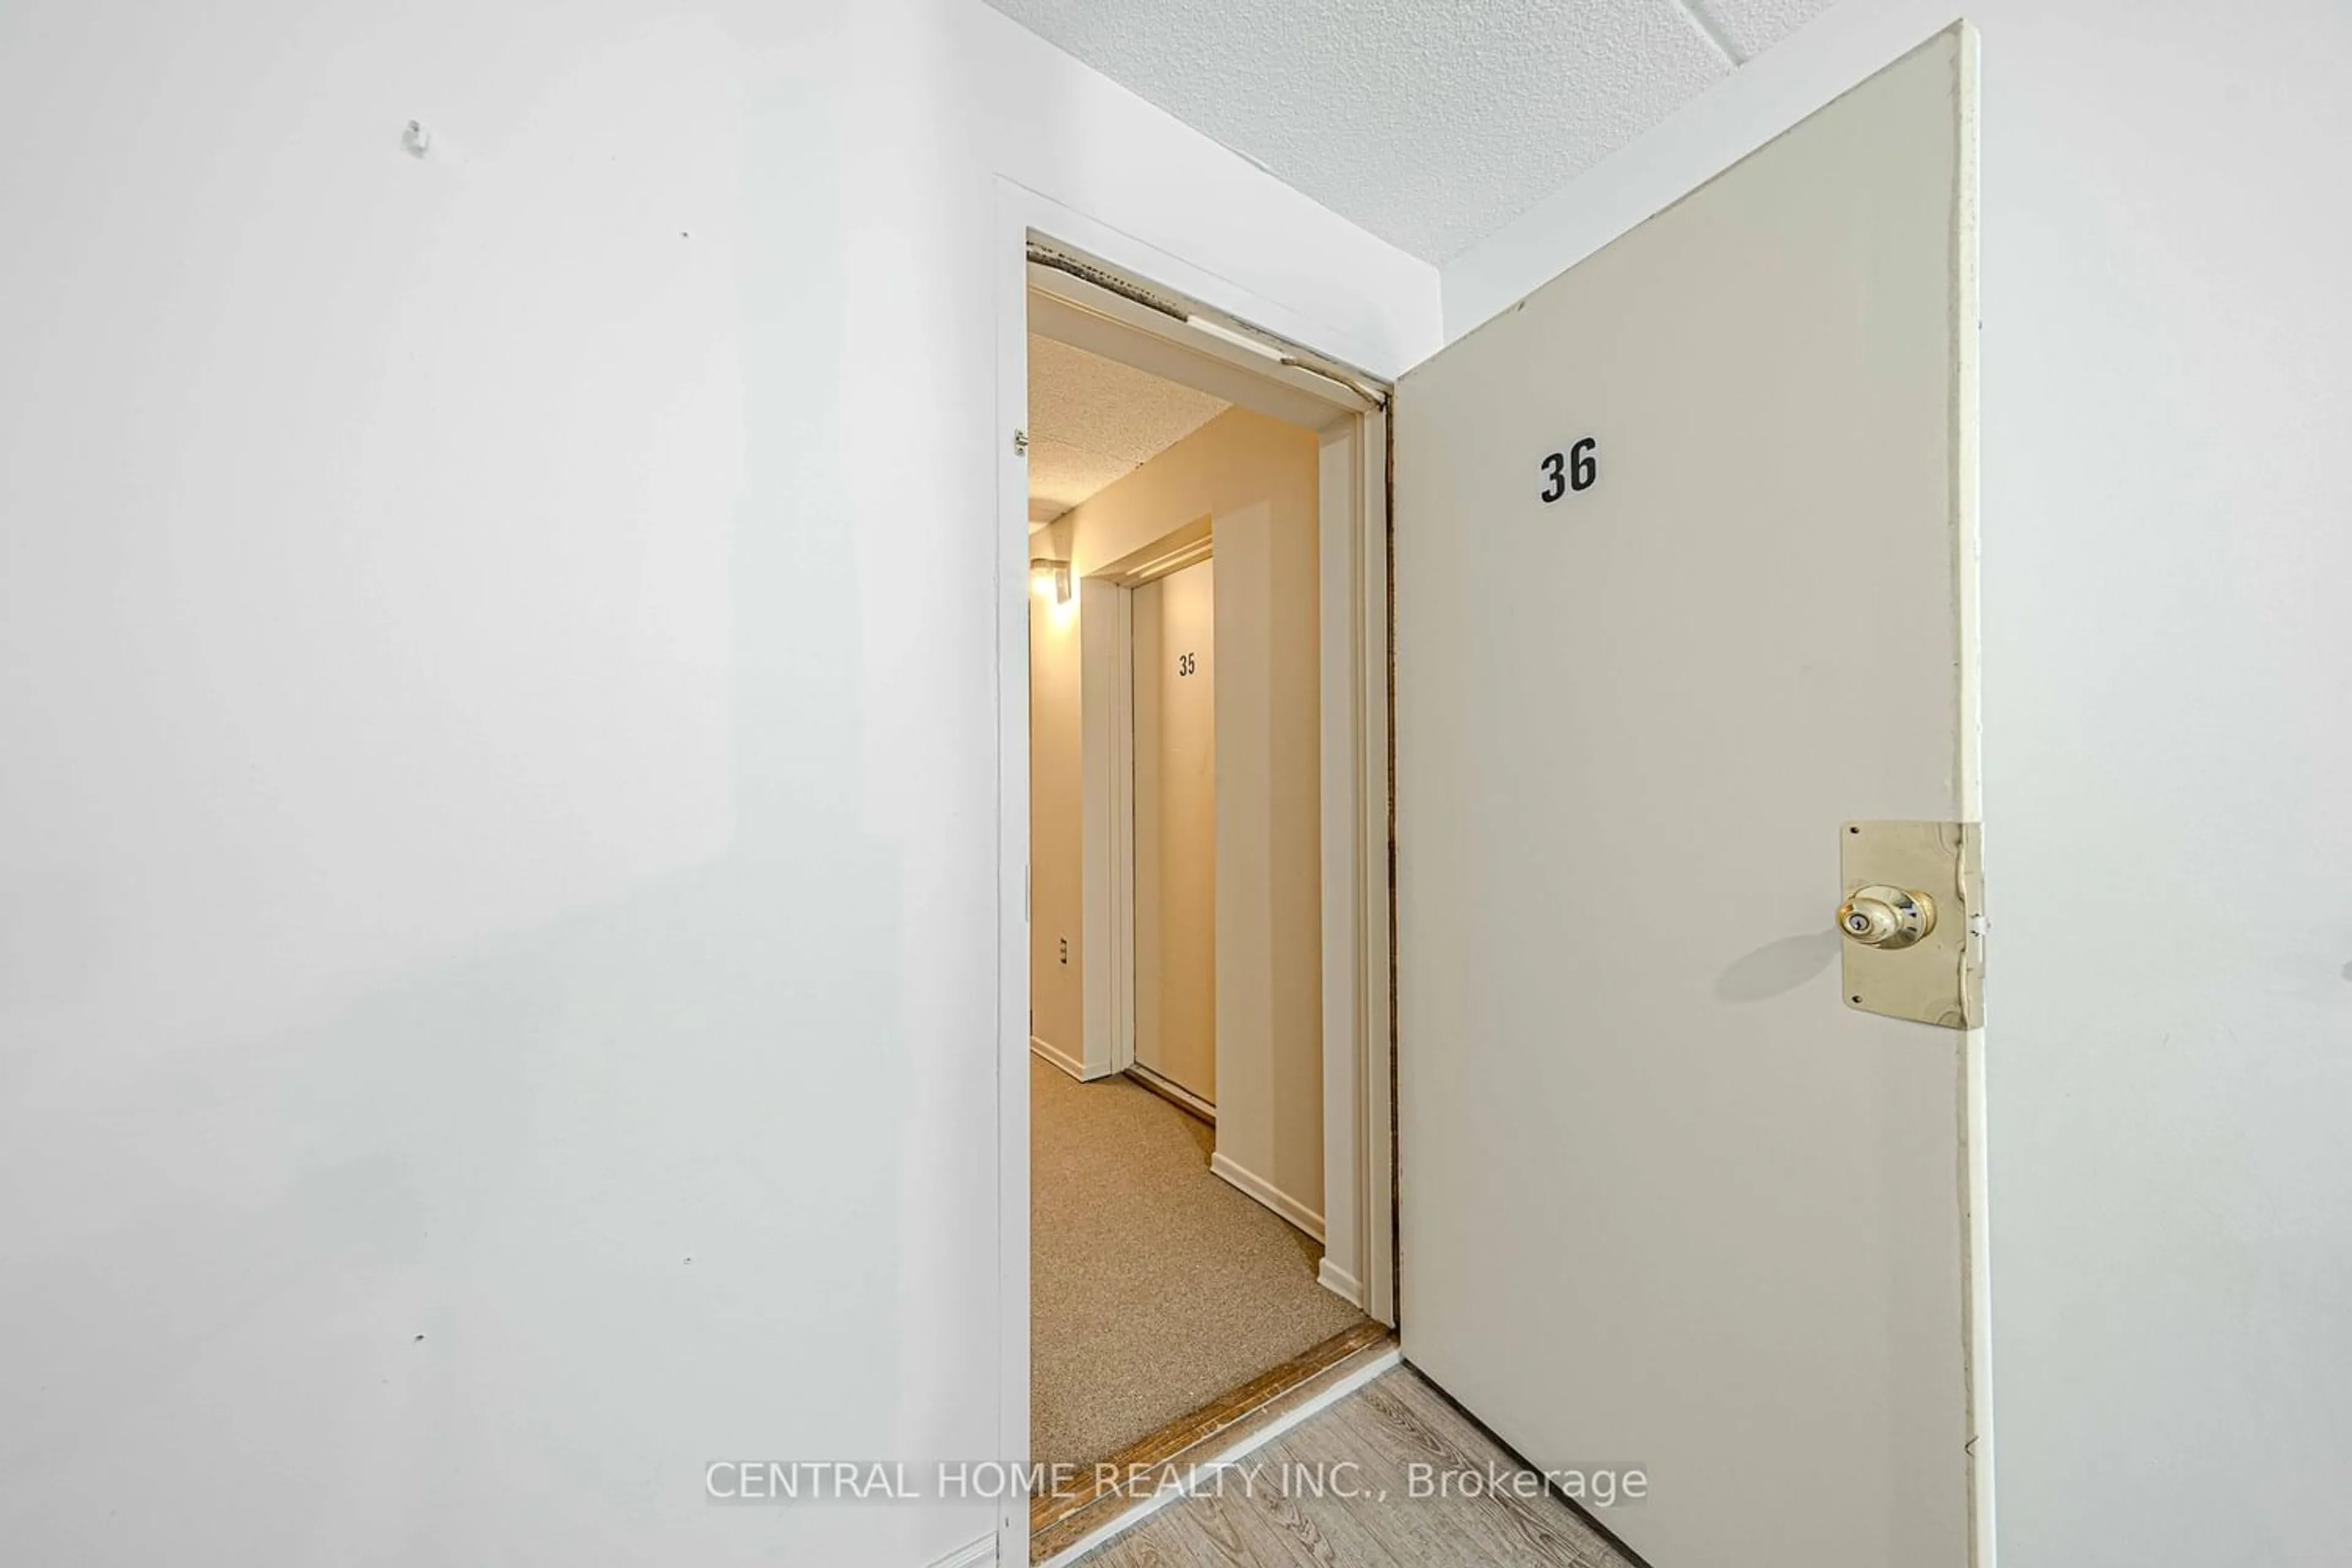 Unknown indoor space for 43 Taunton Rd #36, Oshawa Ontario L1G 3T6